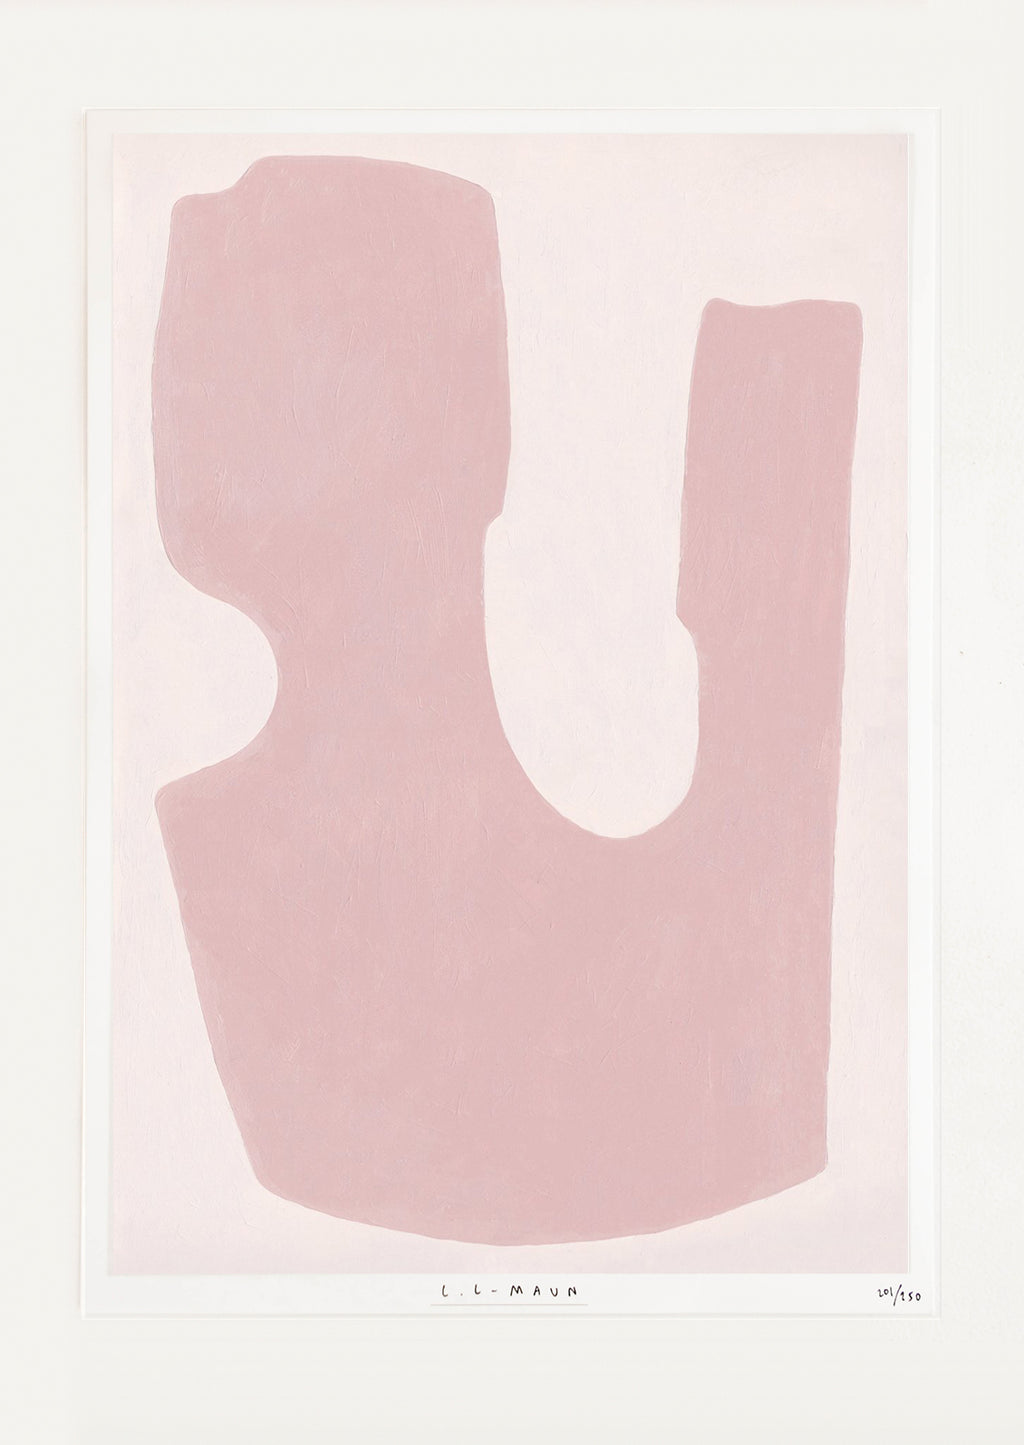 1: An abstract deep pink U-like form sits against a pale pink background.